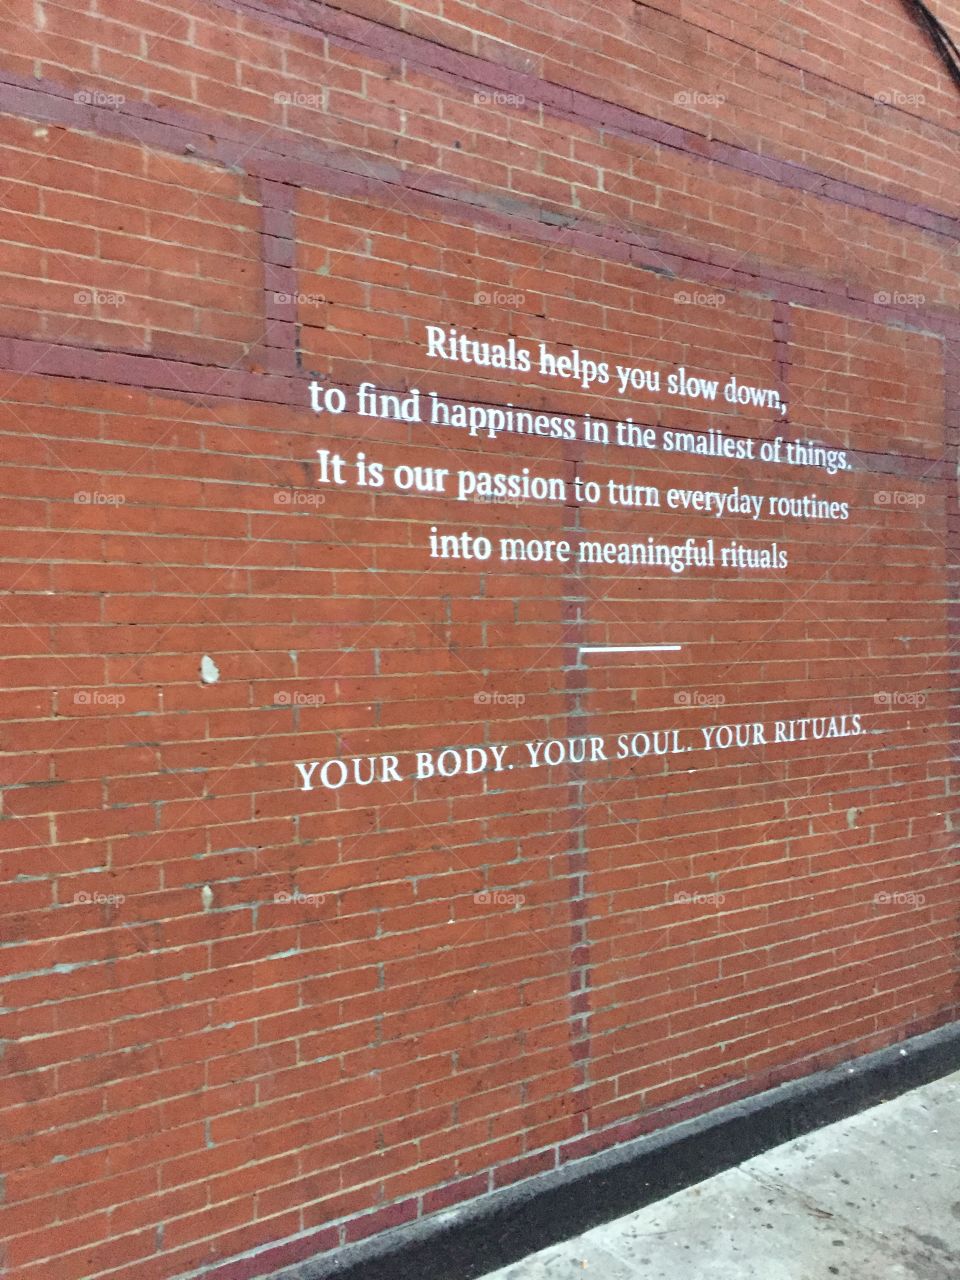 Quotes on the wall of Brooklyn inspire 